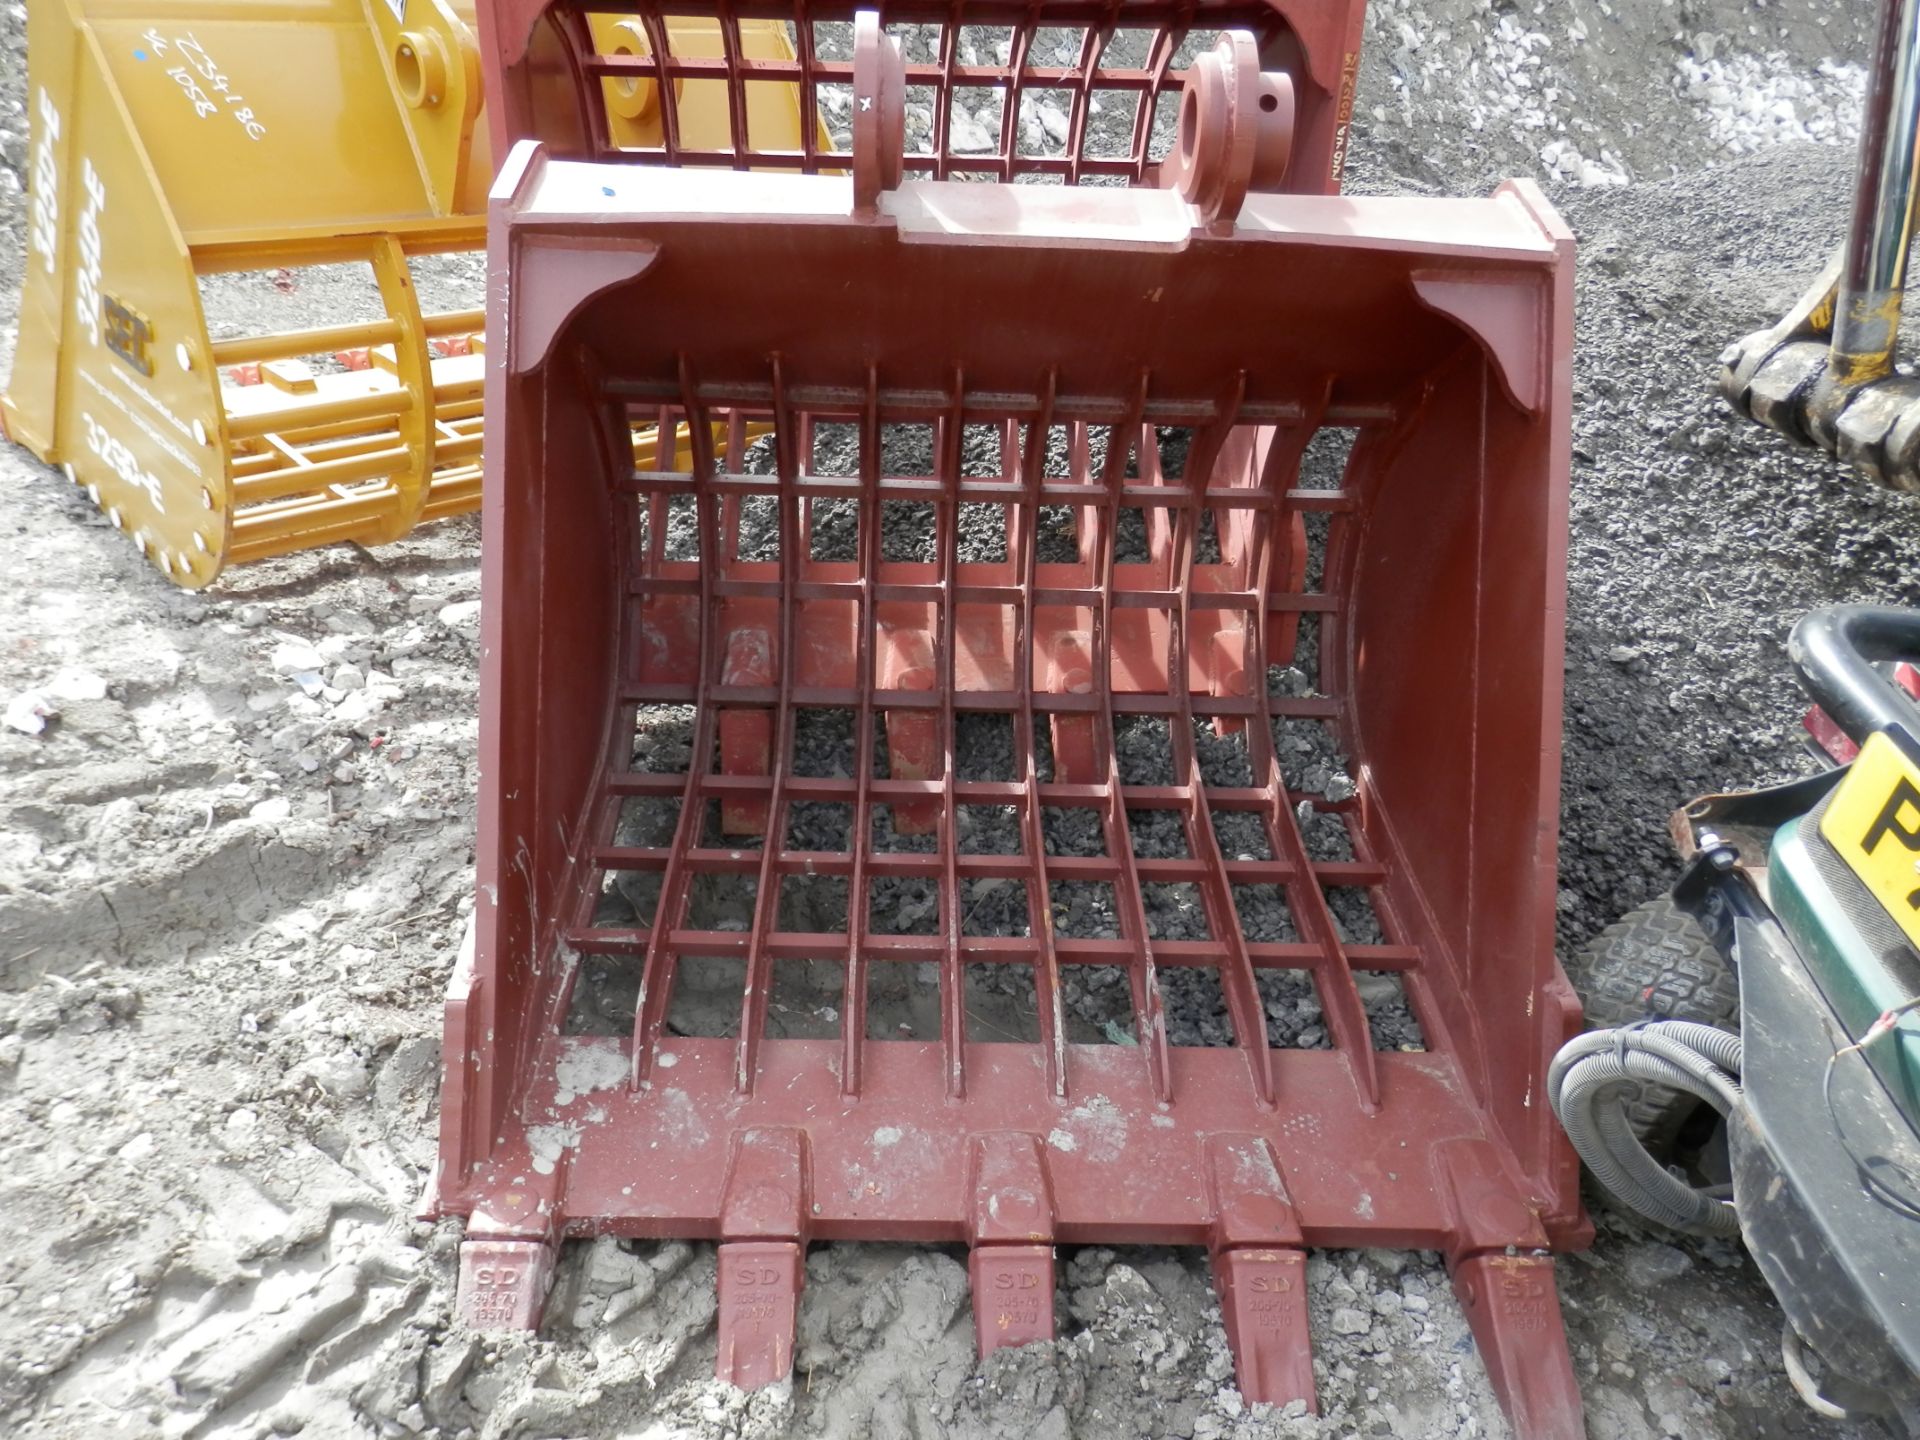 1 X RIDDLE BUCKET TO FIT 10T KOMATSU DIGGER. NEW & UNUSED. - Image 3 of 3